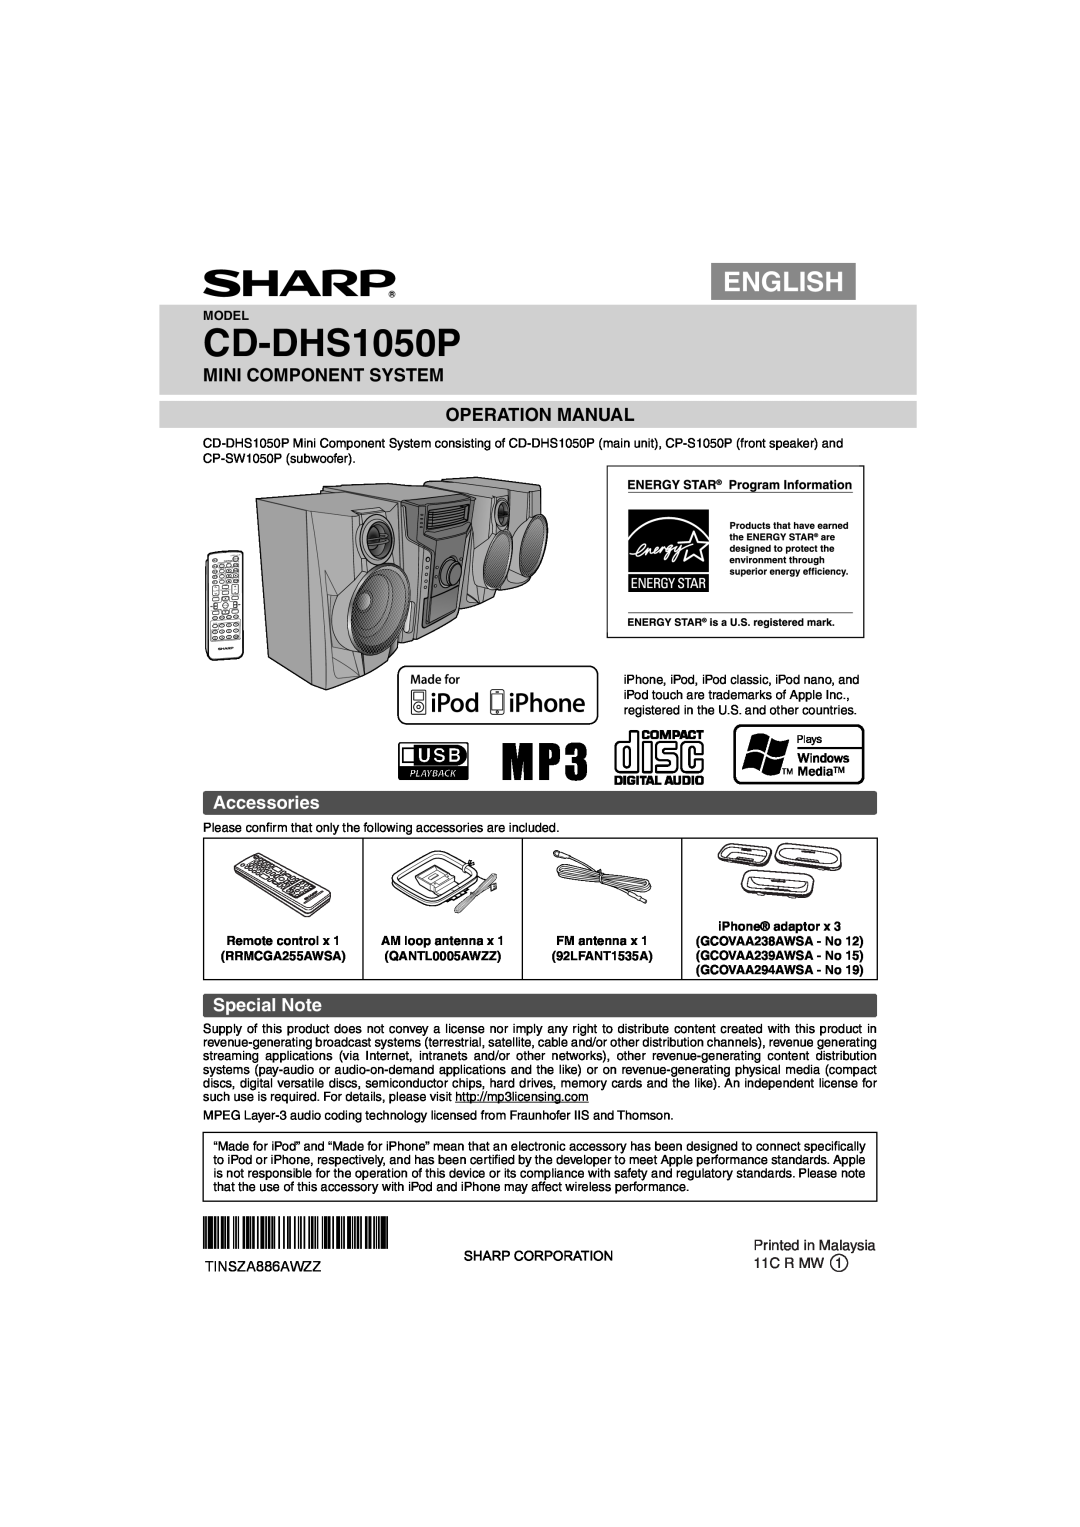 Sharp operation manual Accessories, Special Note, CD-DHS1050P, English, TINSZA886AWZZ 